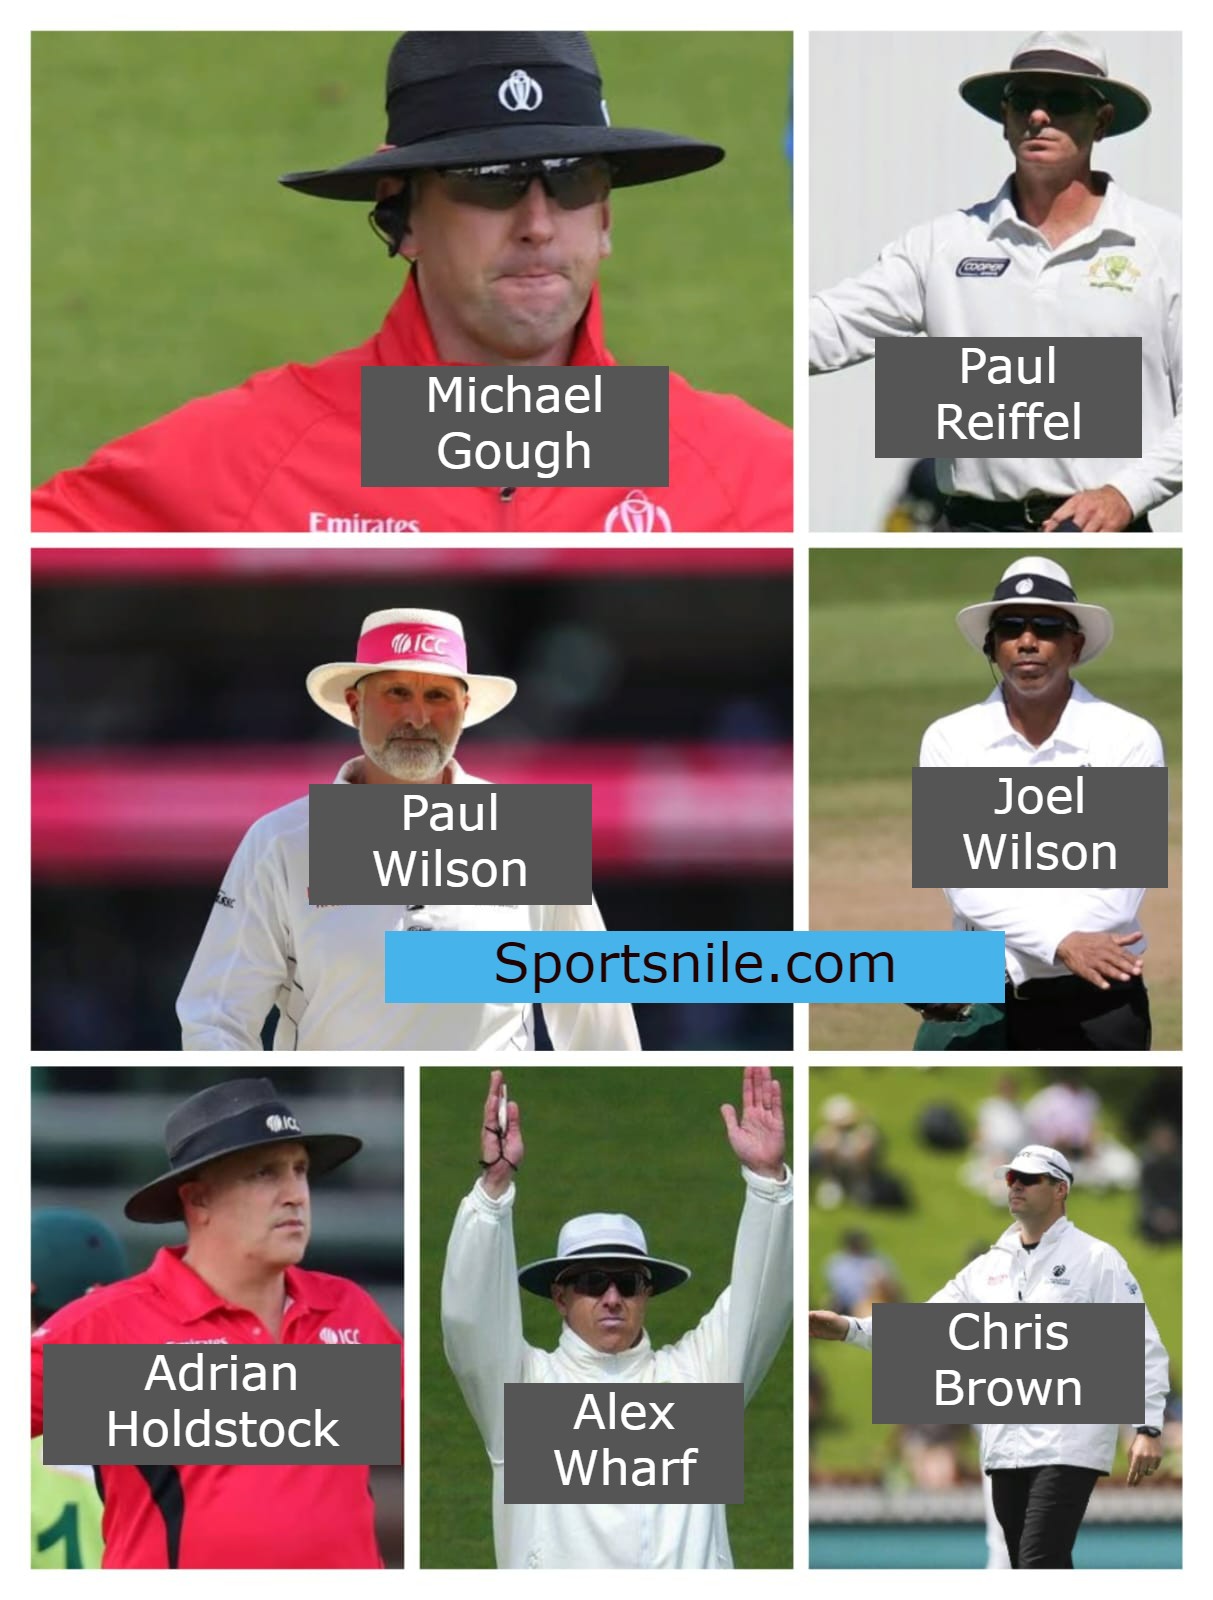 Who are the umpires for today’s cricket match